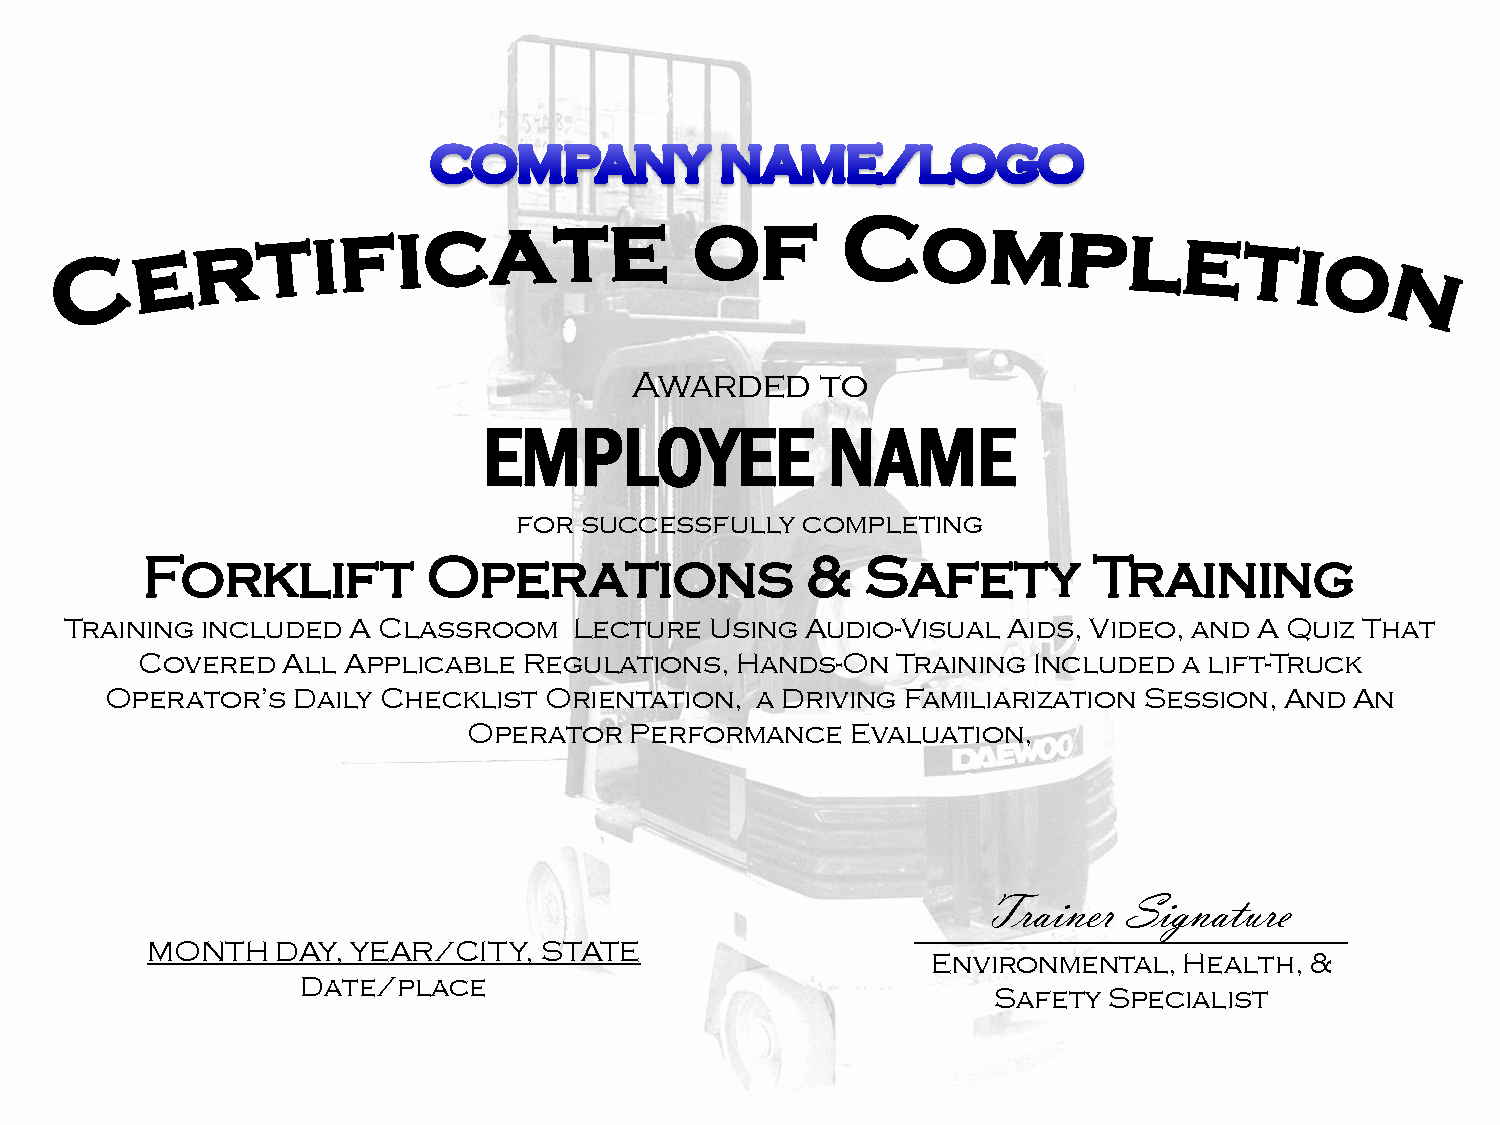 Certificate Templates: Forklift Certification Card Template Throughout Forklift Certification Card Template